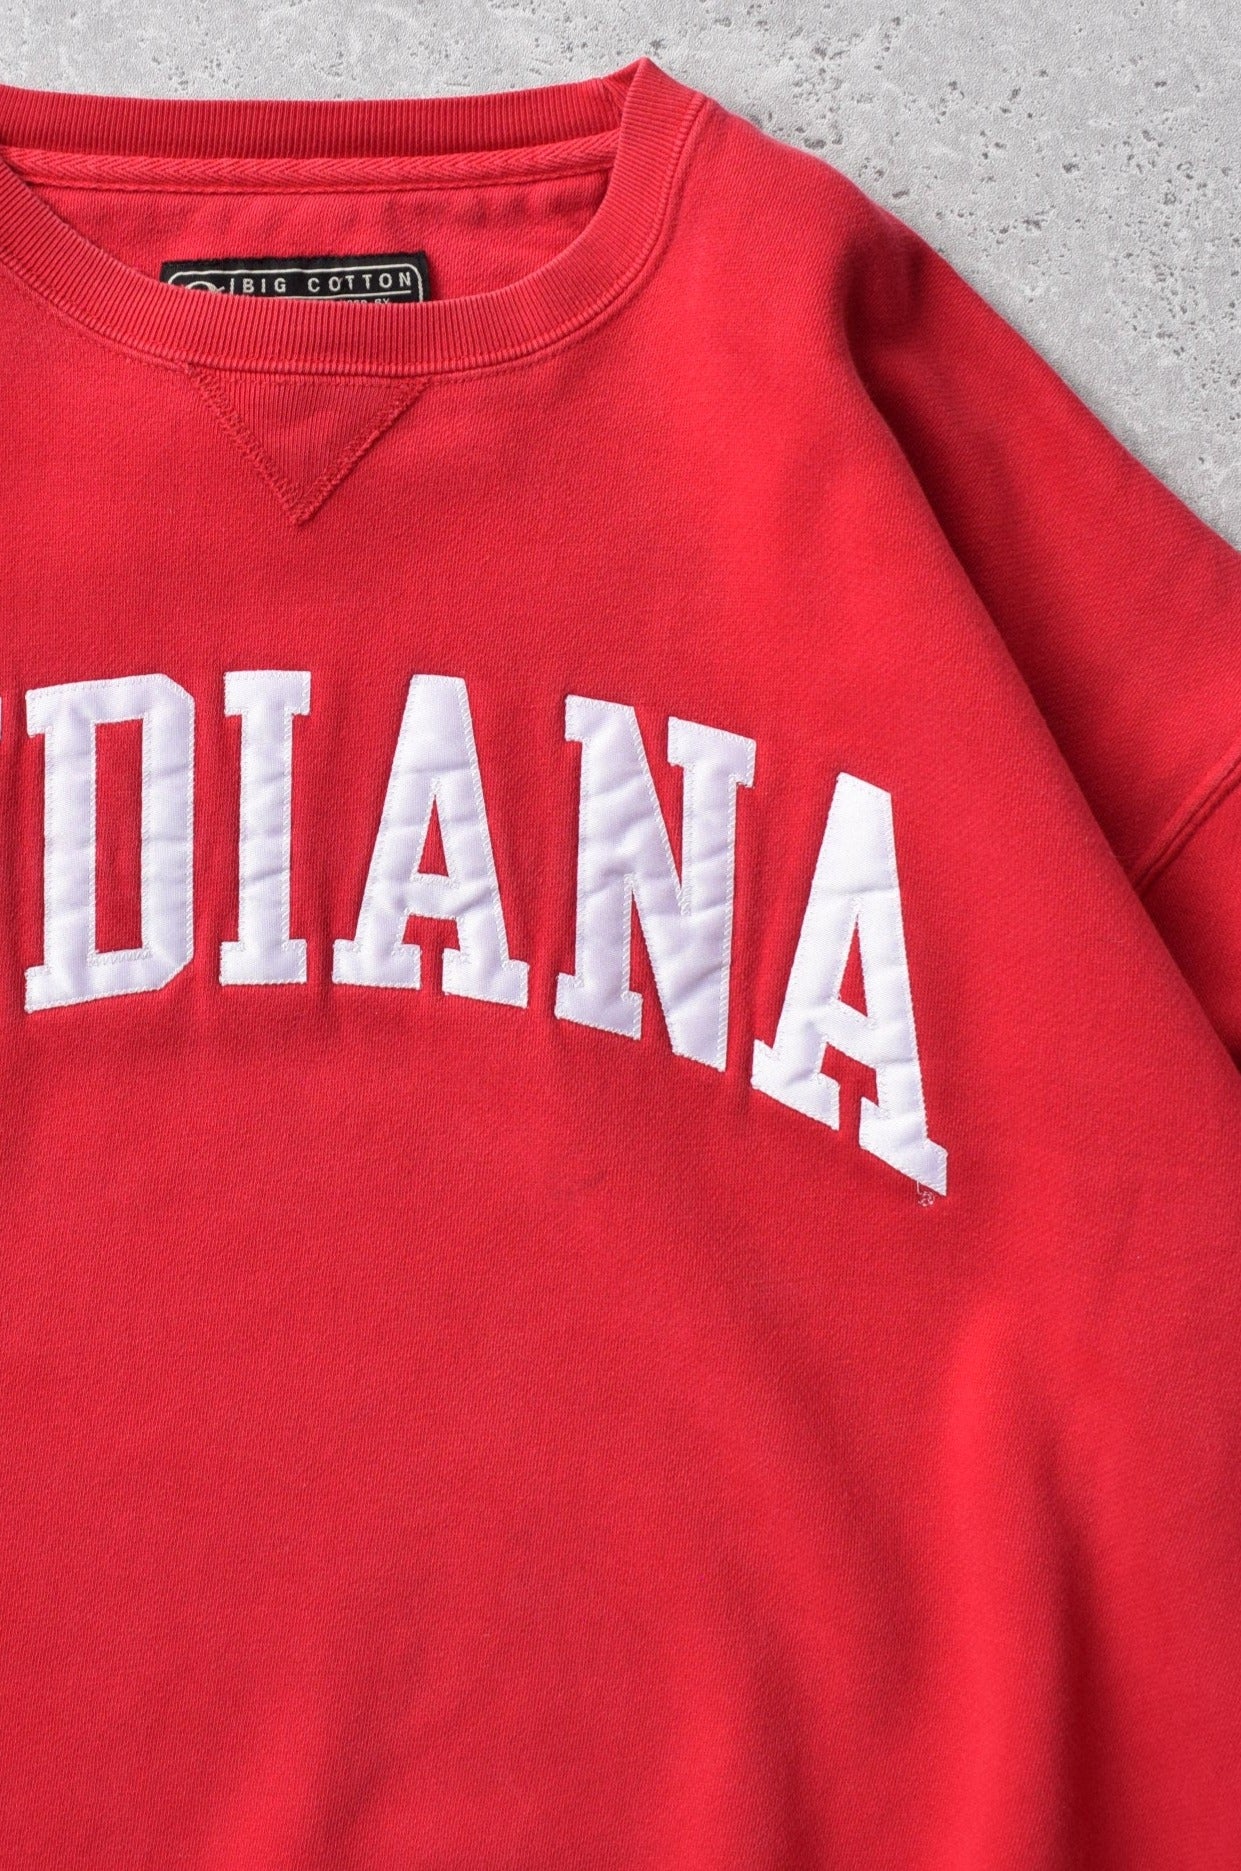 Vintage 90s Indiana University Embroidered Sweater (XL) - Retrospective Store